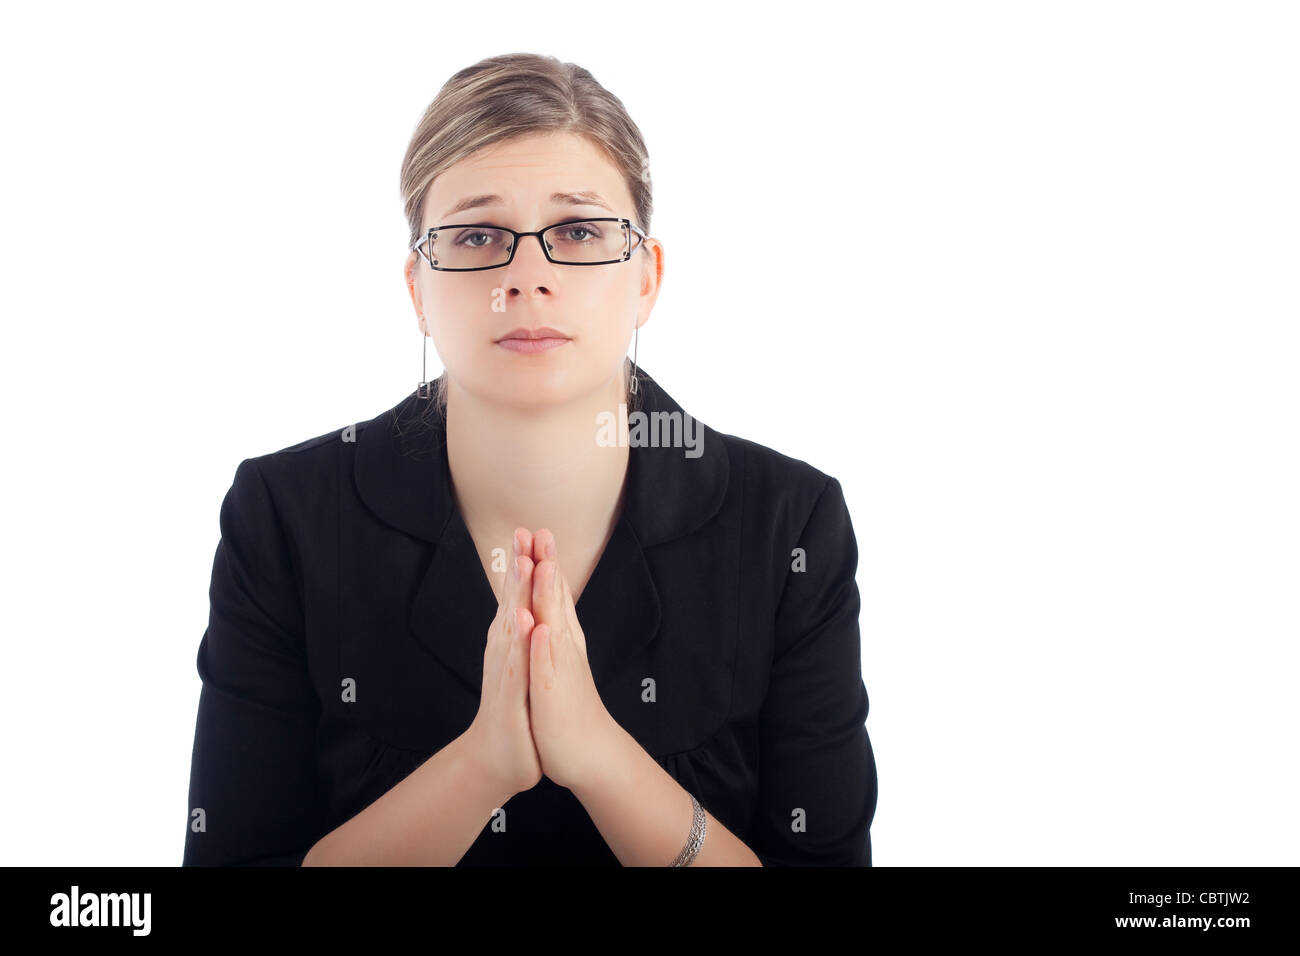 Desperate young woman praying, isolated on white background. Stock Photo